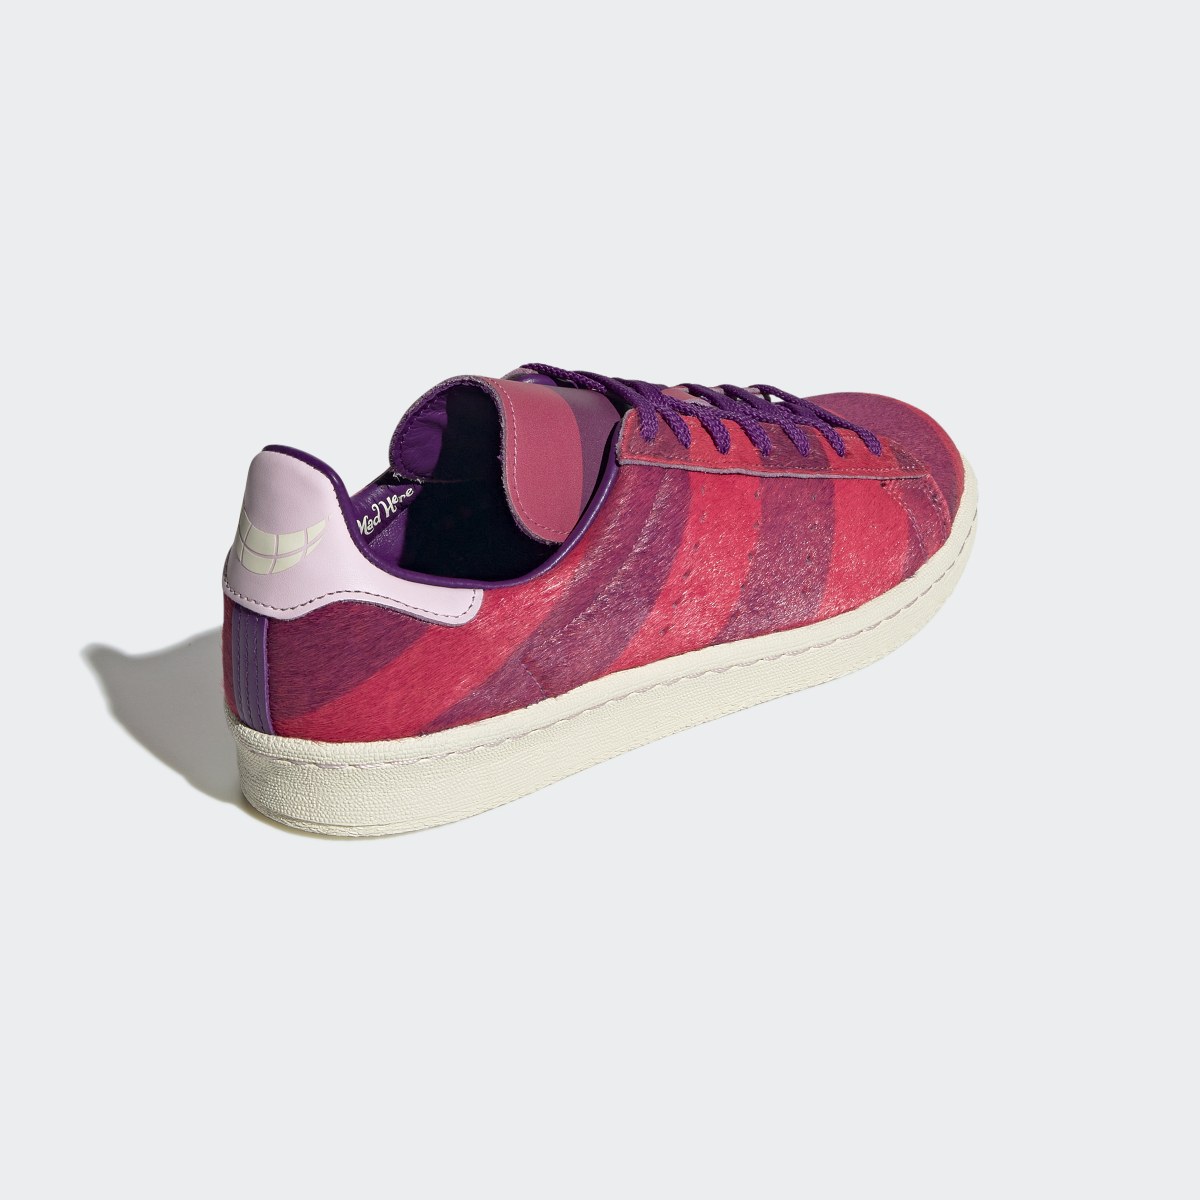 Adidas Campus 80s Cheshire Cat Shoes. 7